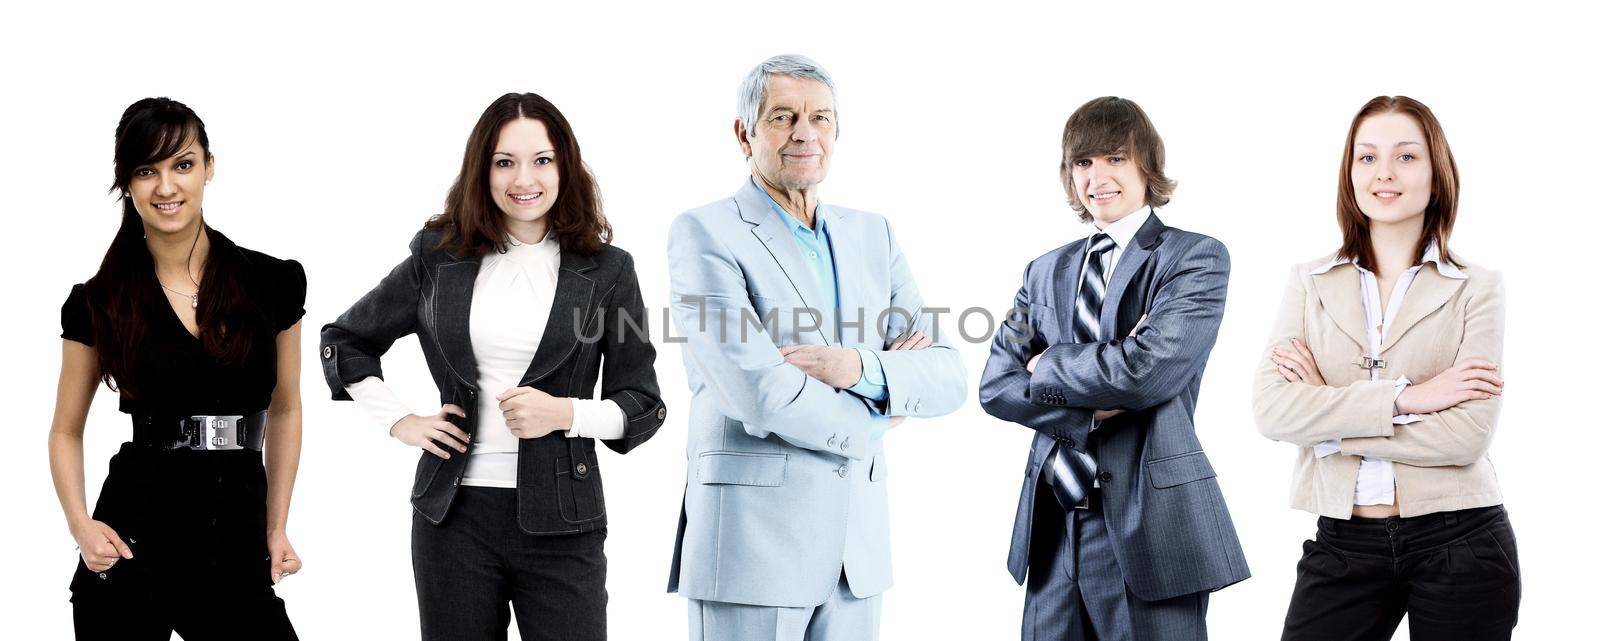 A team of businessmen led by an experienced leader. by SmartPhotoLab